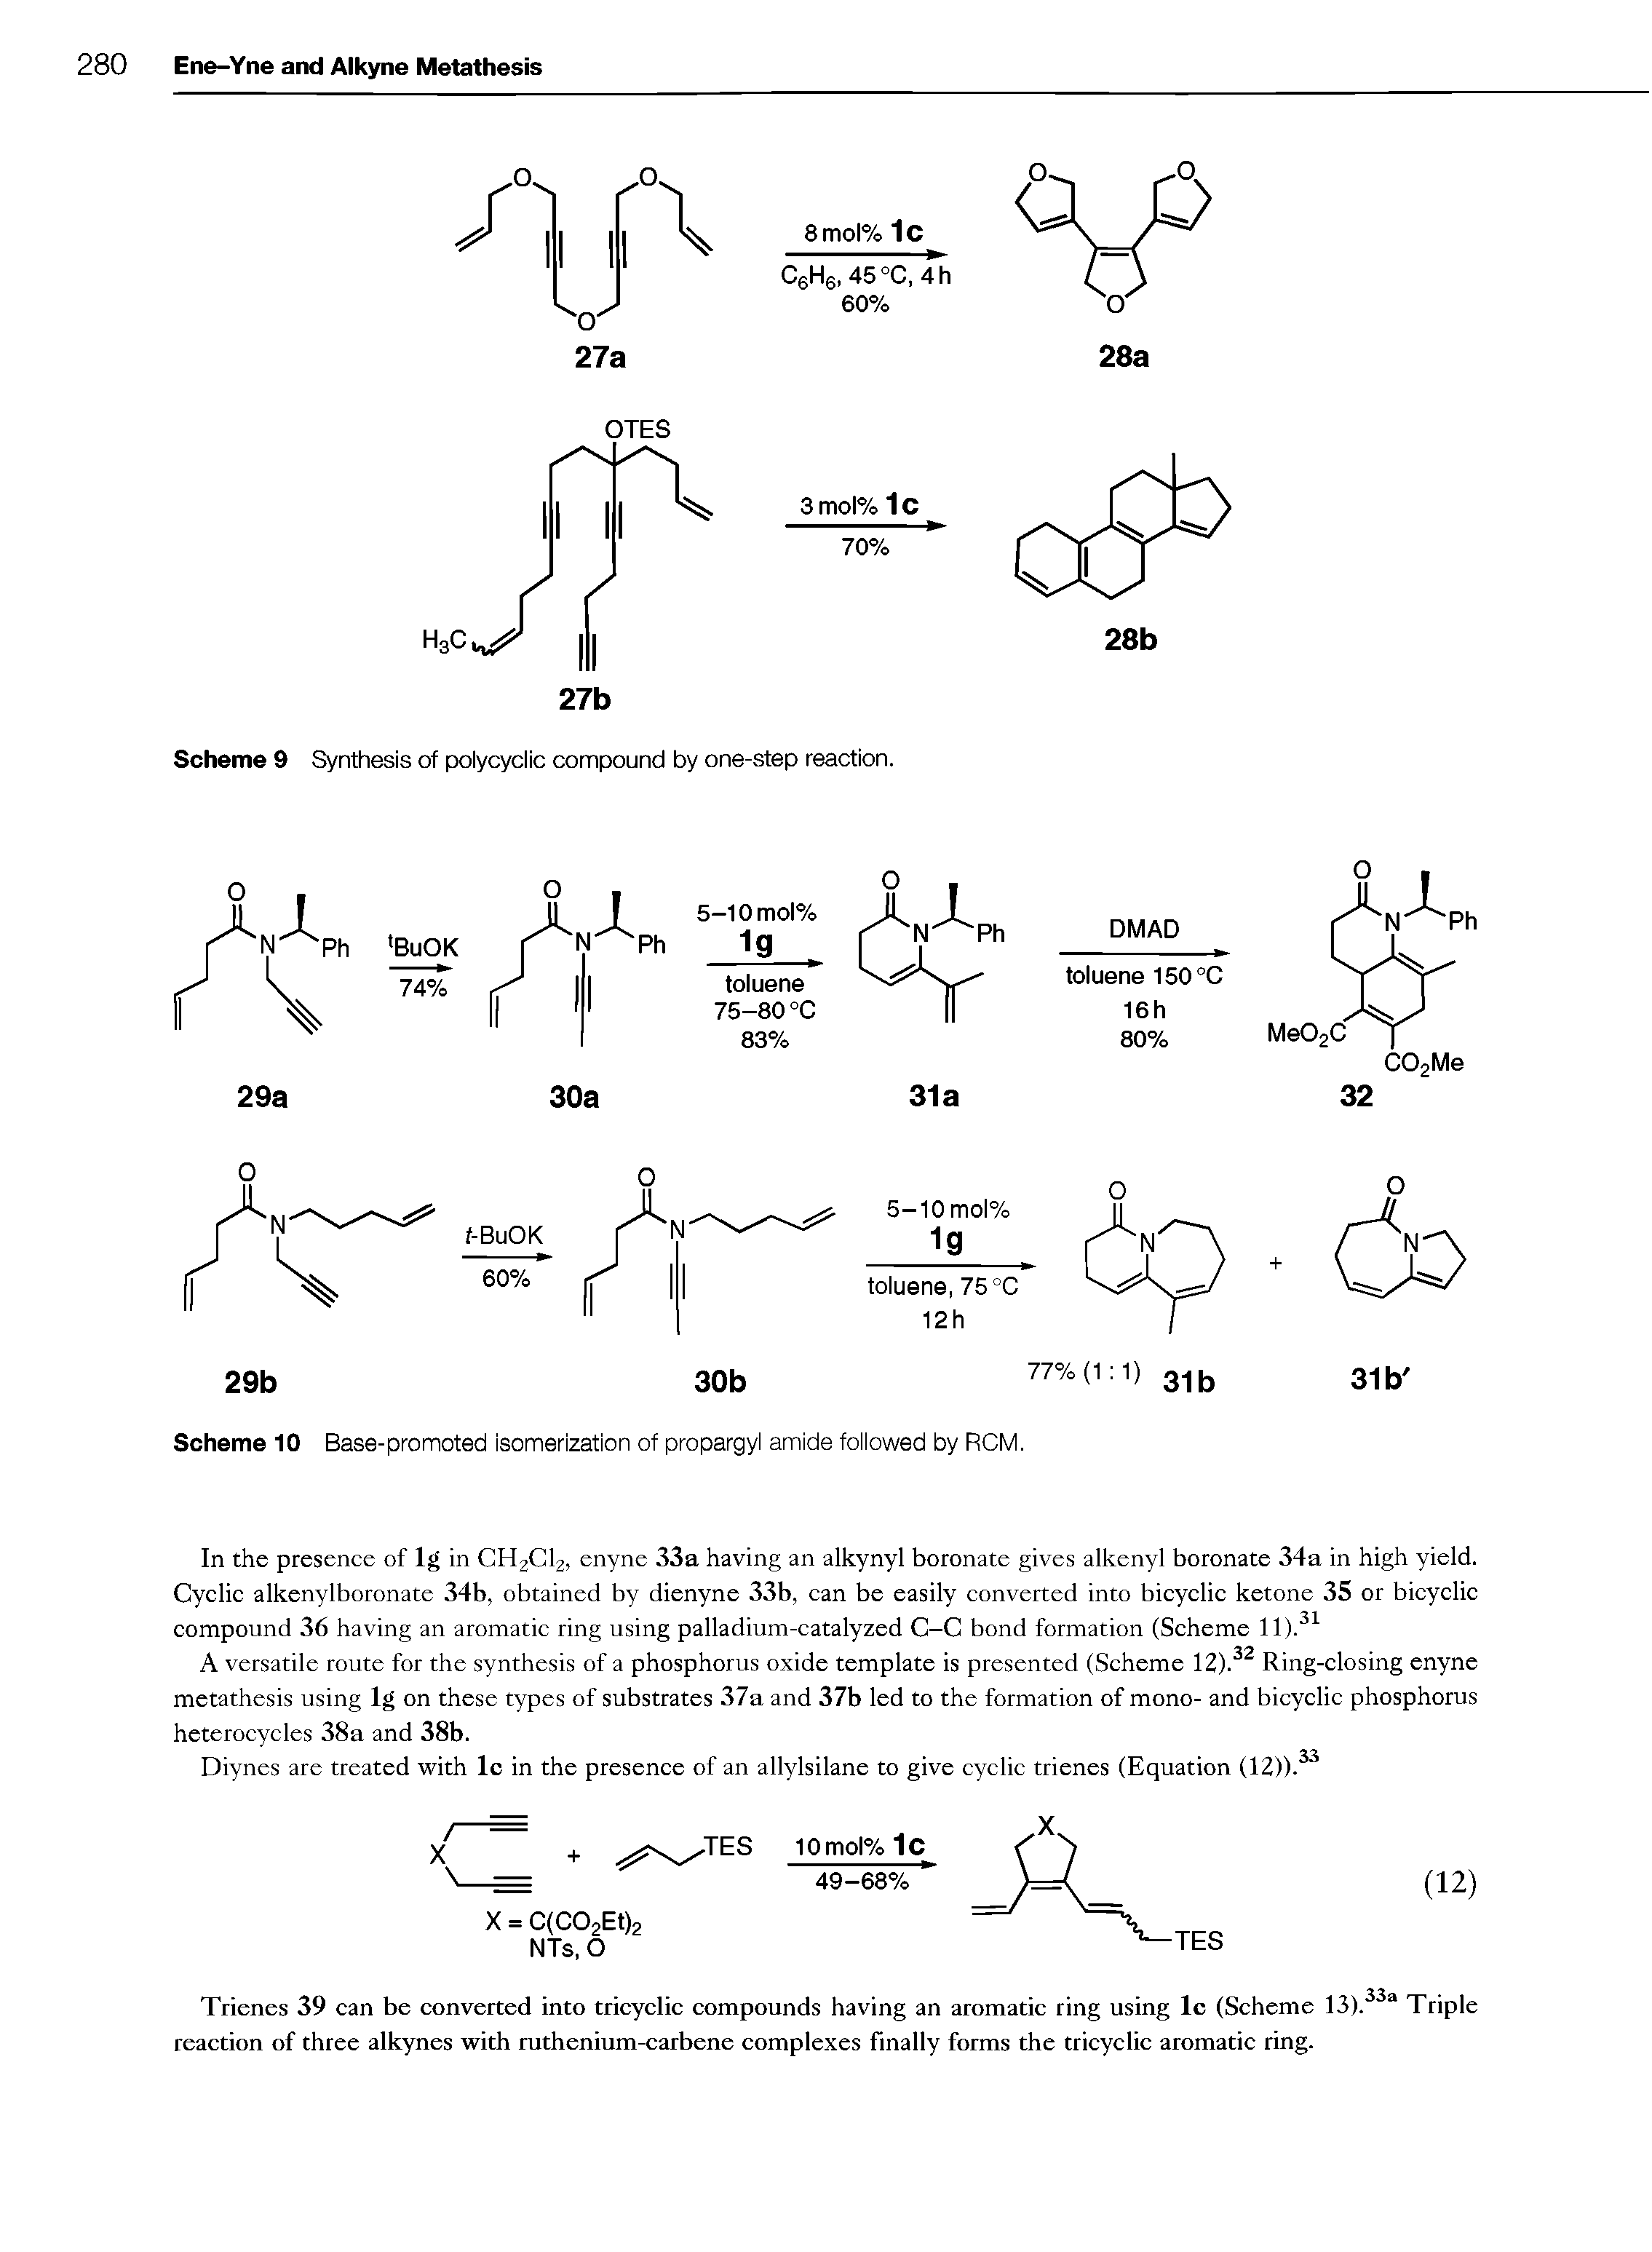 Scheme 10 Base-promoted isomerization of propargyi amide foiiowed by RCM.